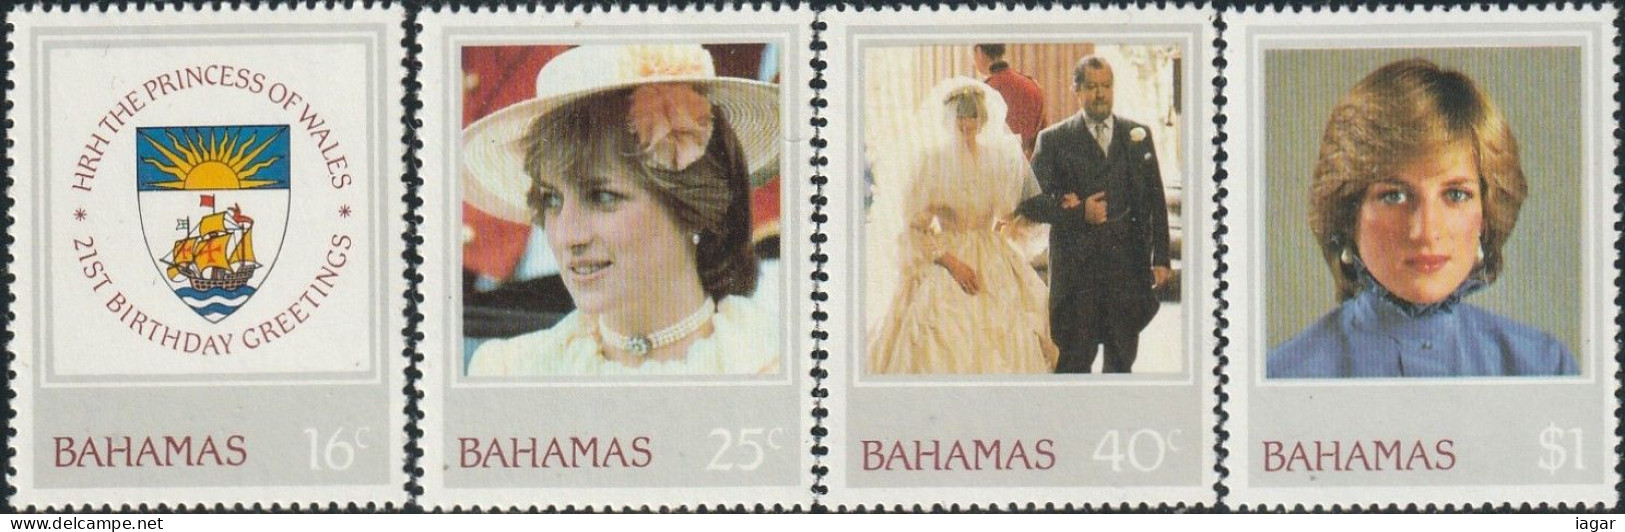 THEMATIC FAMOUS WOMEN:  LADY DIANA SPENCER. 21st BIRTHDAY OF PRINCESS OF WALES    -  BAHAMAS - Famous Ladies